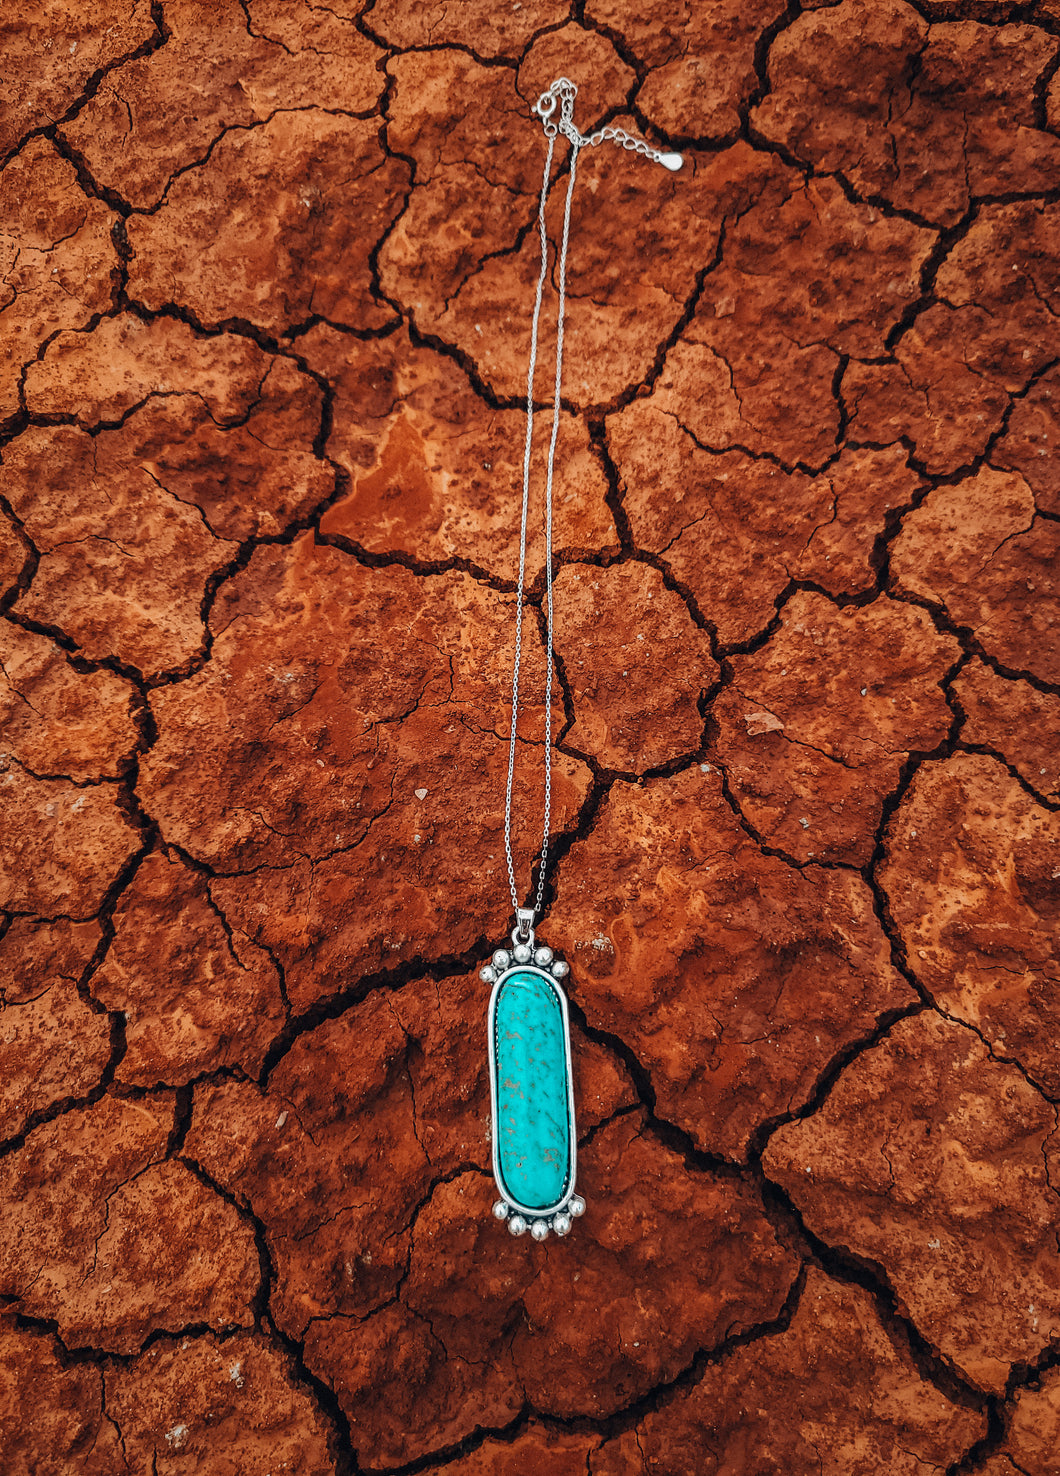 Turquoise Style Pendent on Silver Chain